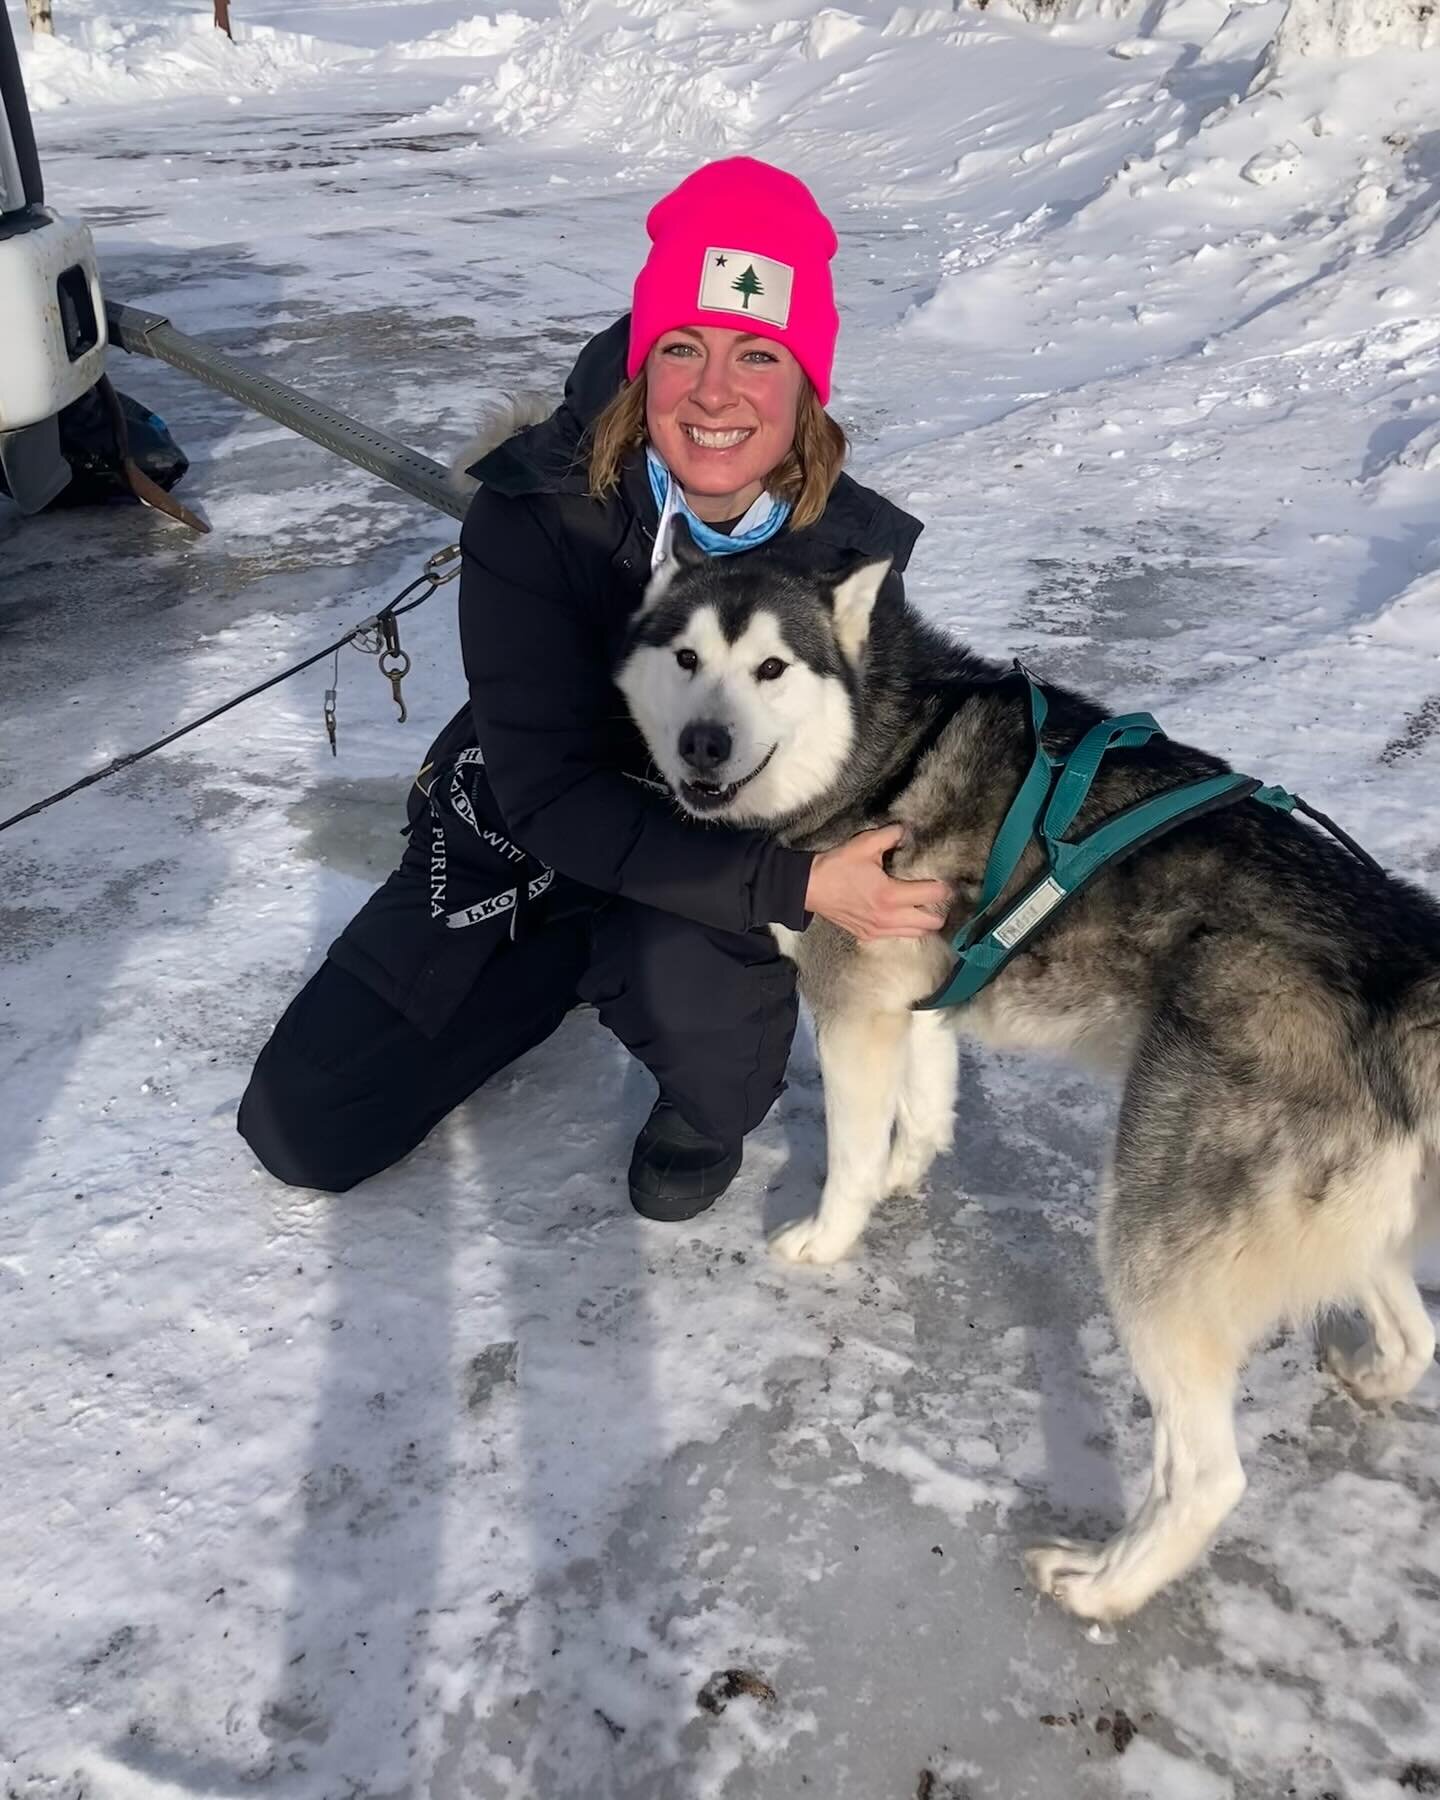 Our Emma went on an epic adventure last week to volunteer as a dog handler at the Iditarod!! She had an incredible experience learning about this sport and the culture around it. She saw remarkably beautiful landscapes including the peak of Denali! S